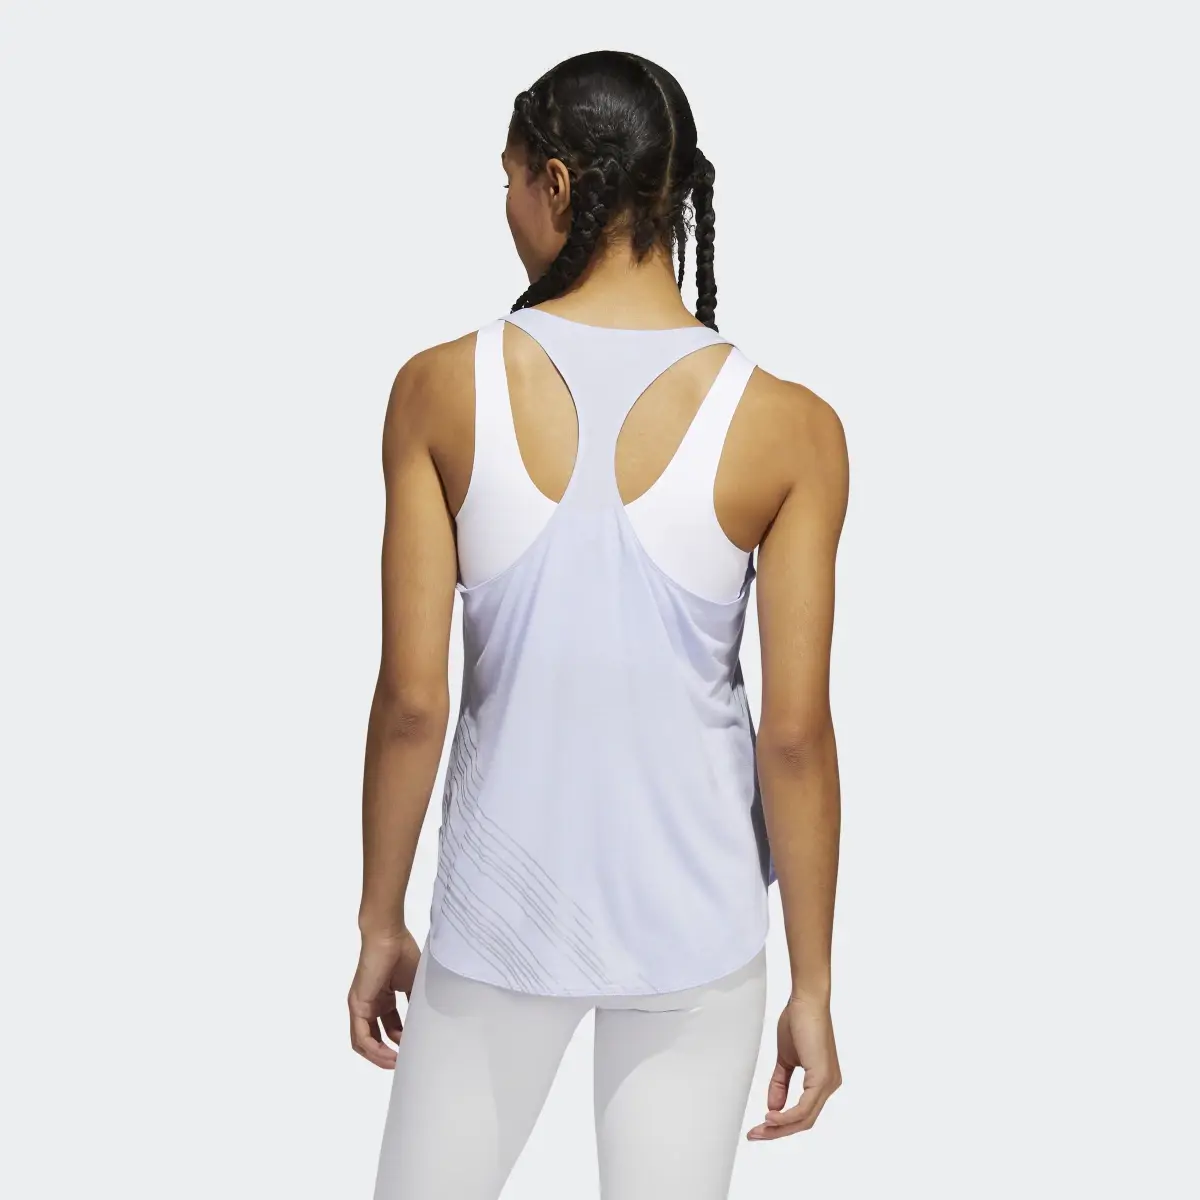 Adidas Capable of Greatness Training Tank Top. 3